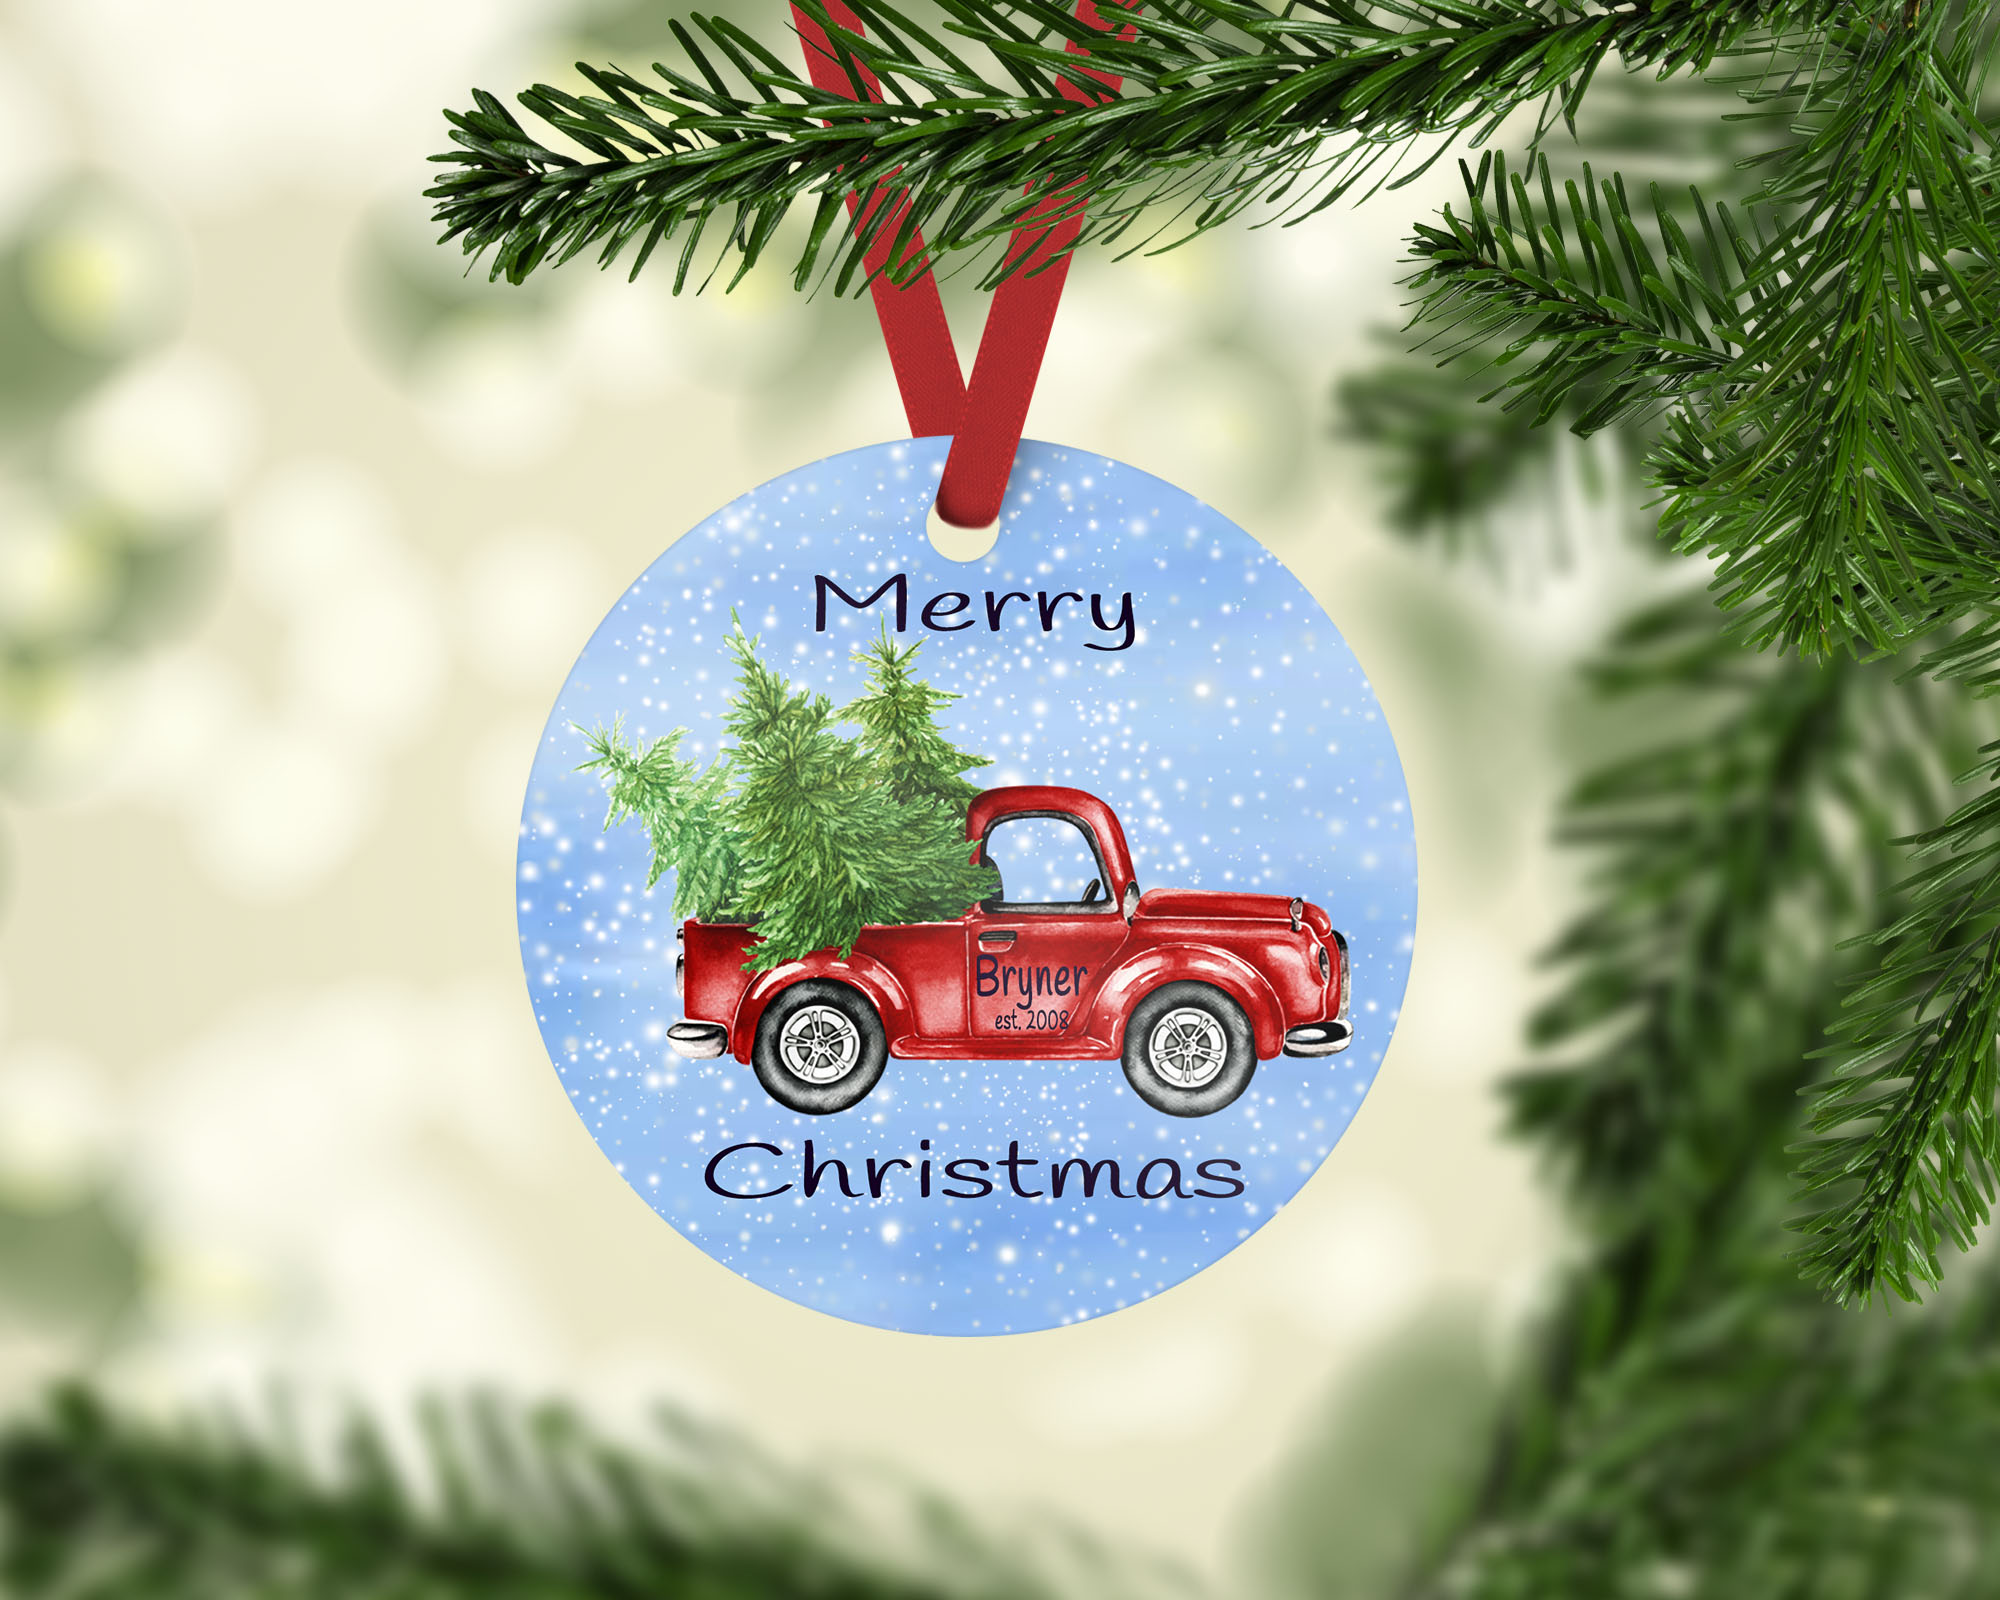 Vintage Truck Ornament made with sublimation printing